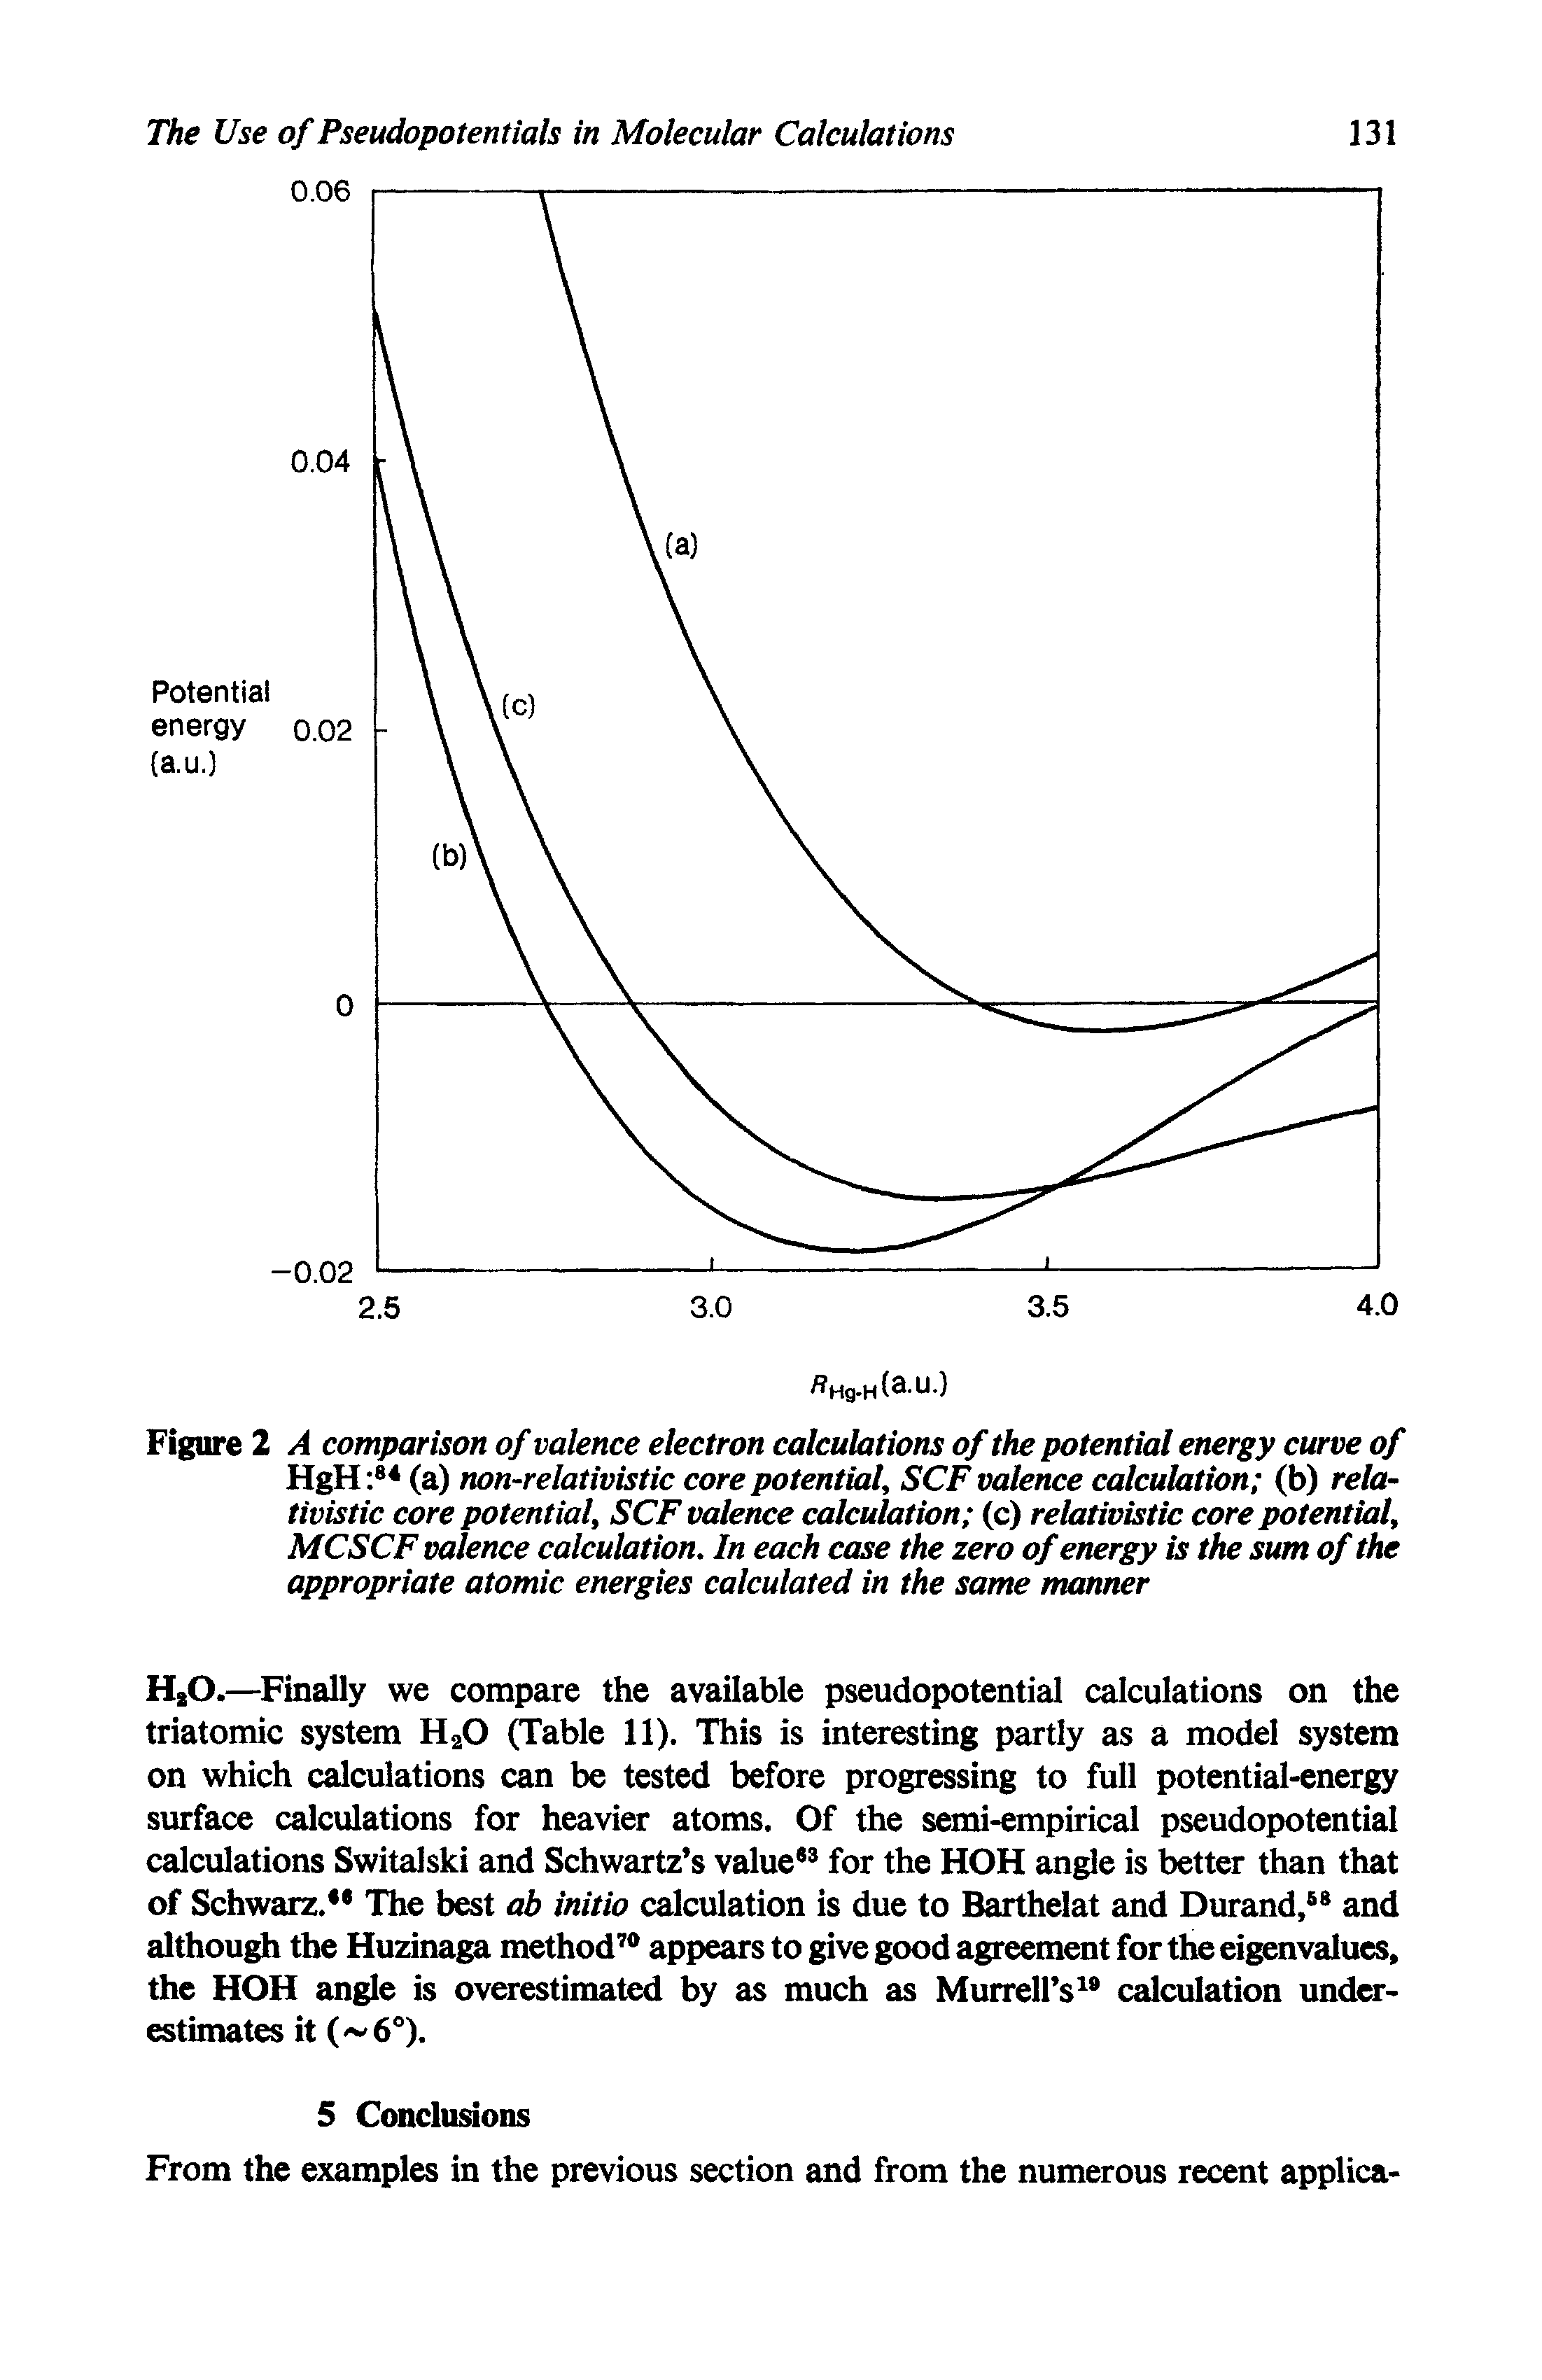 Figure 2 A comparison of valence electron calculations of the potential energy curve of HgH 84 (a) non-relativistic core potential, SCF valence calculation (b) relativistic core potential, SCF valence calculation (c) relativistic core potential, MCSCF valence calculation. In each case the zero of energy is the sum of the appropriate atomic energies calculated in the same manner...